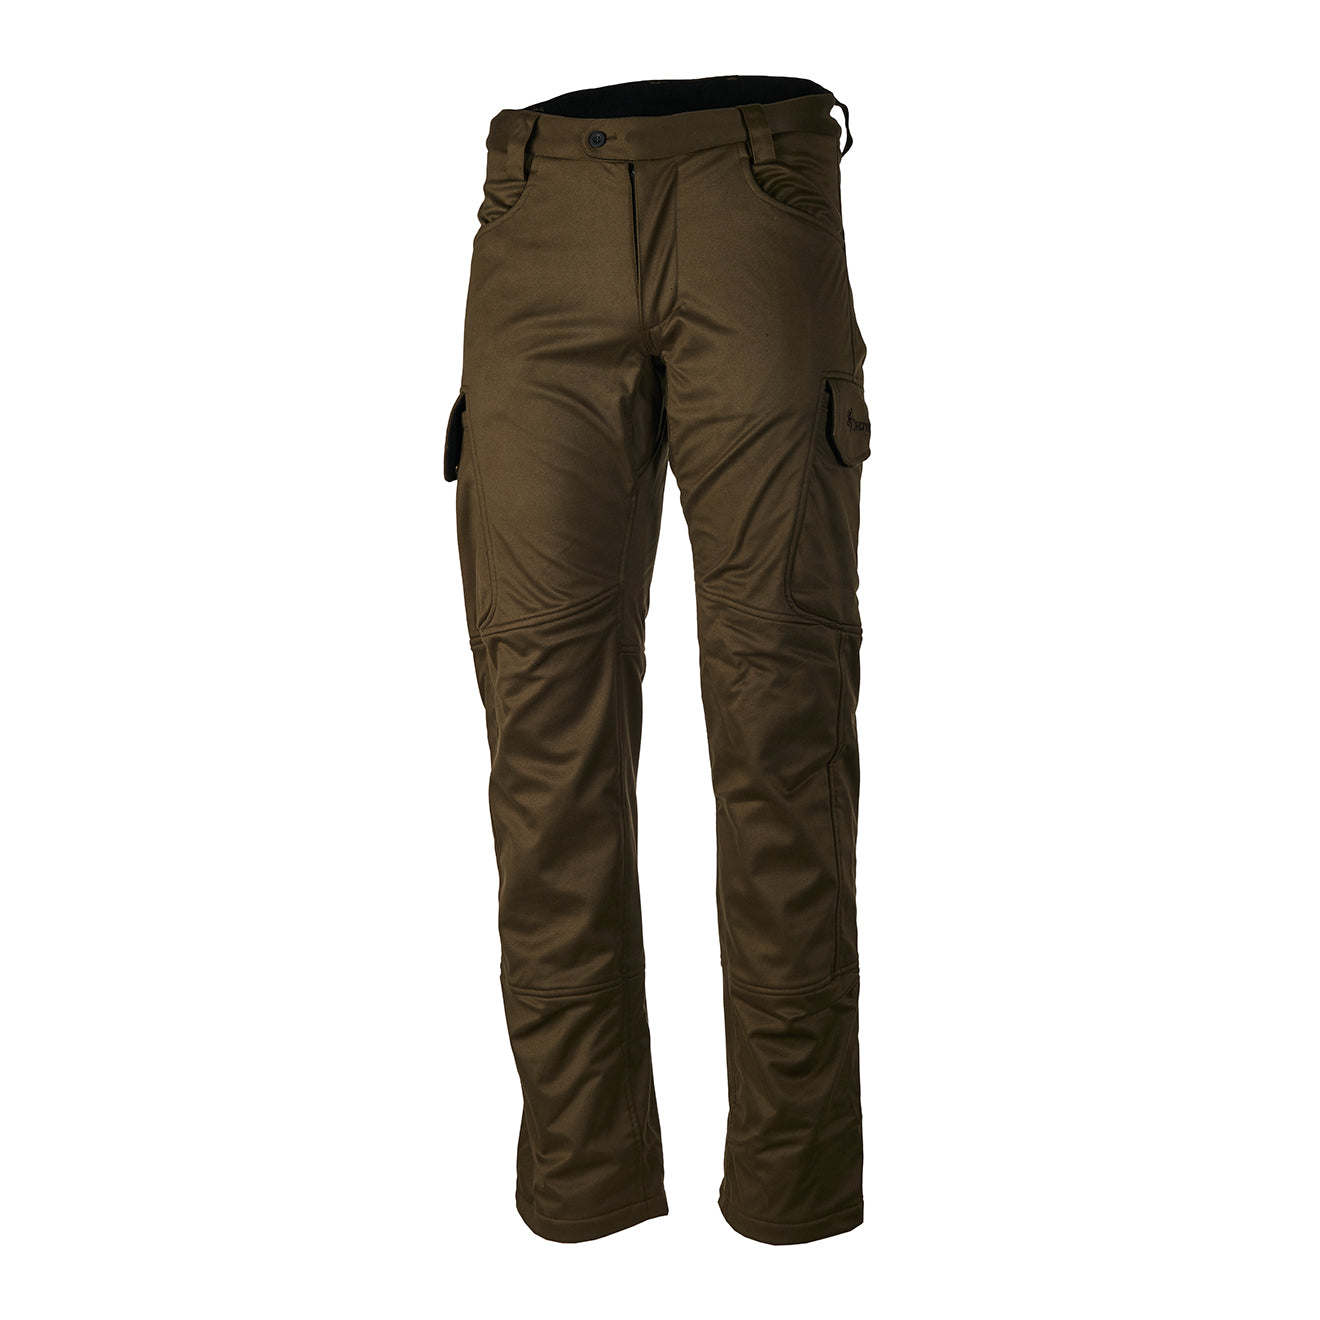 Browning Hells Canyon 2 Odorsmart Trouser Green